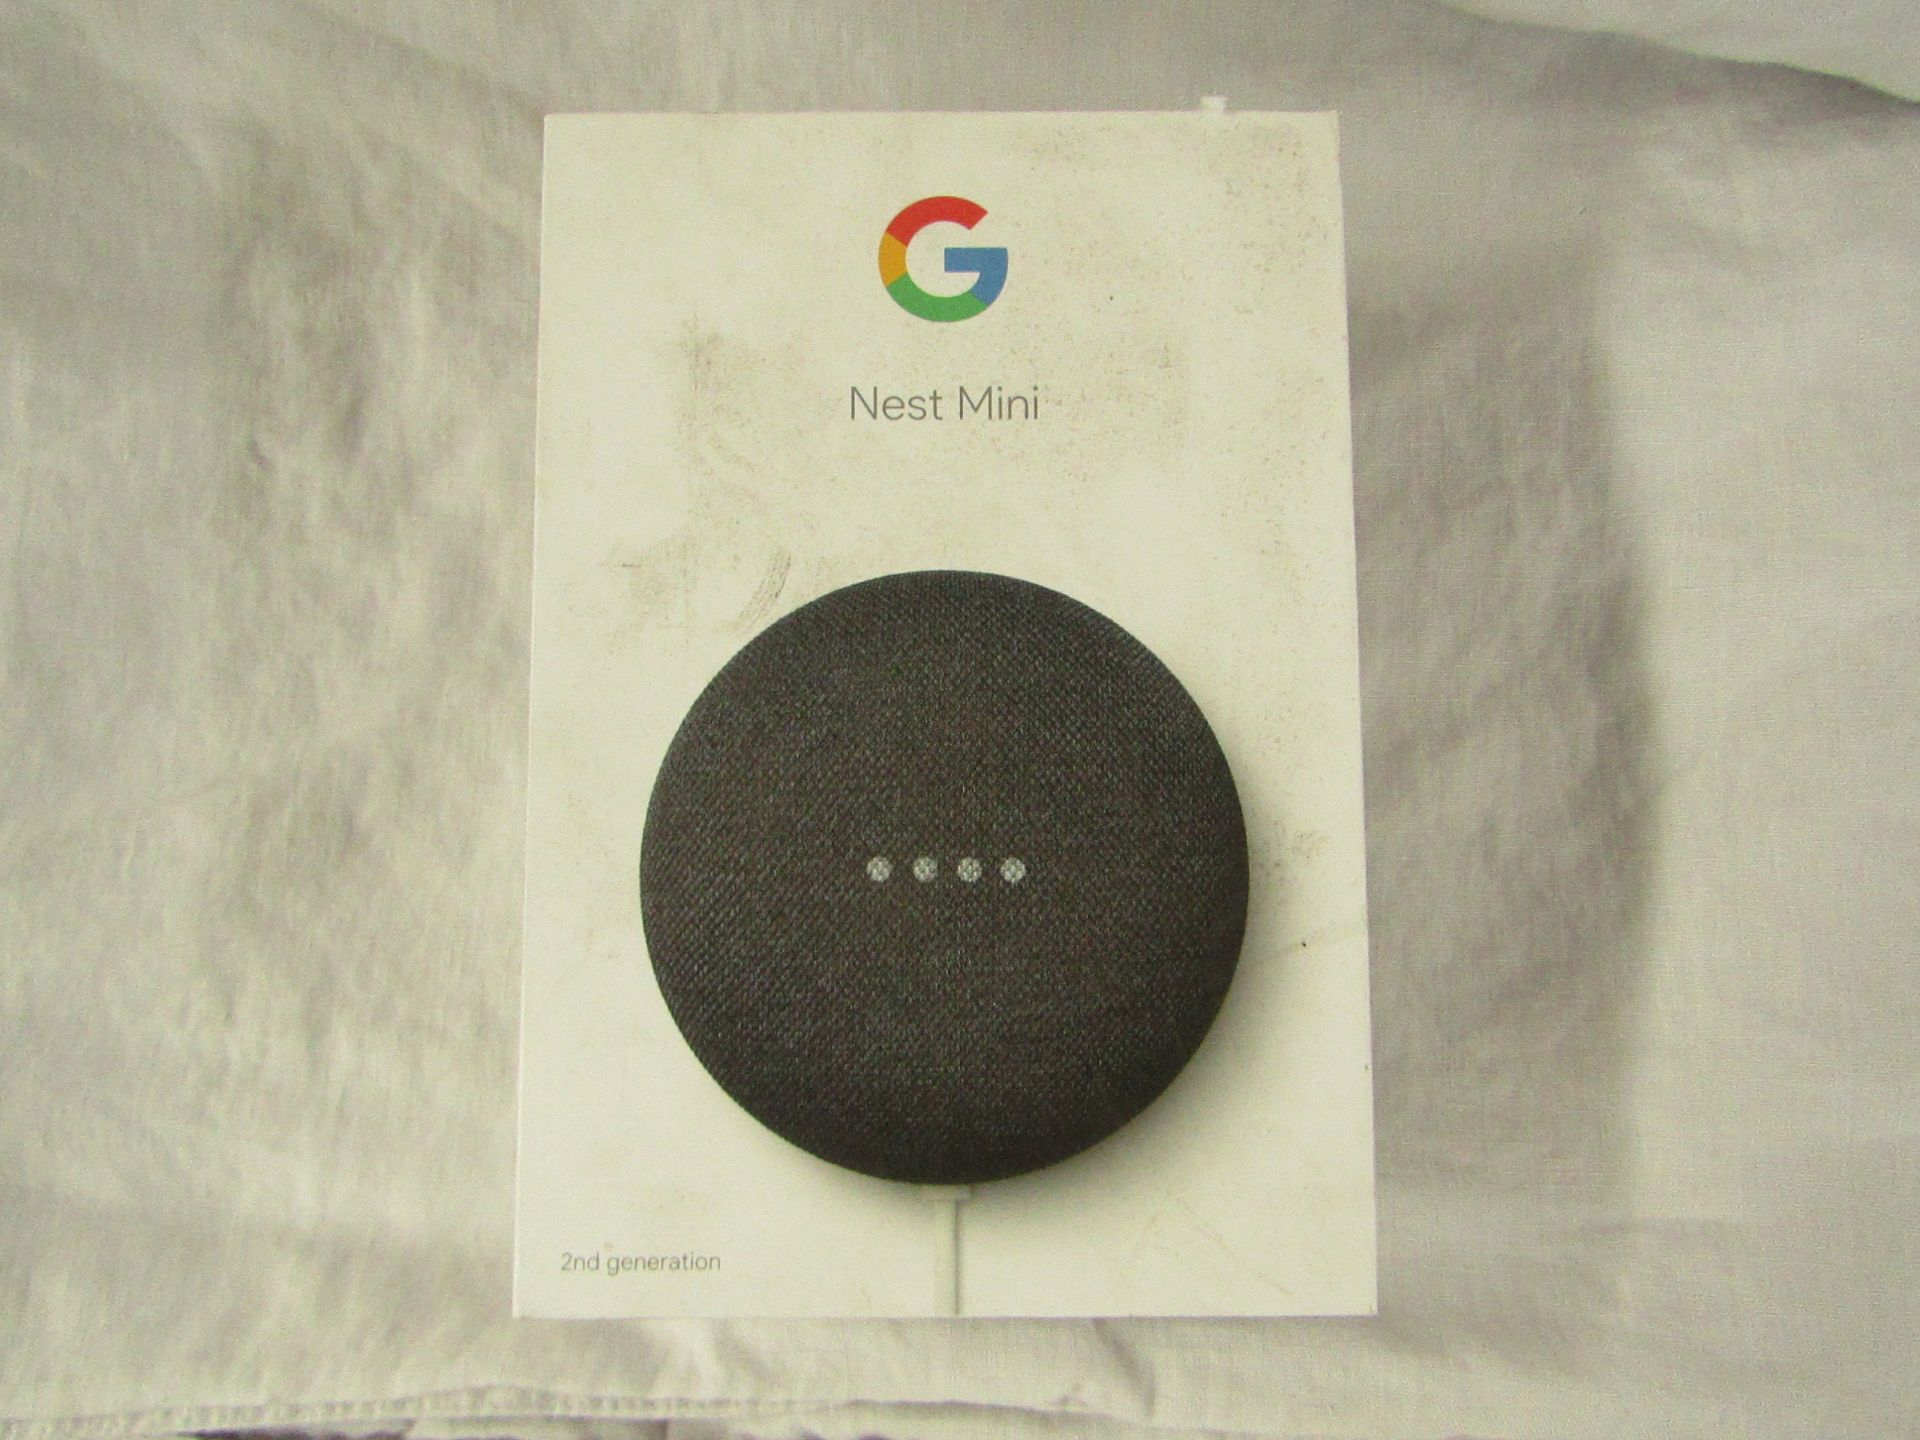 Google Nest Mini. Powers On But Have Not Tested Any Further, Comes In Original Box, RRP £49@ Argos &